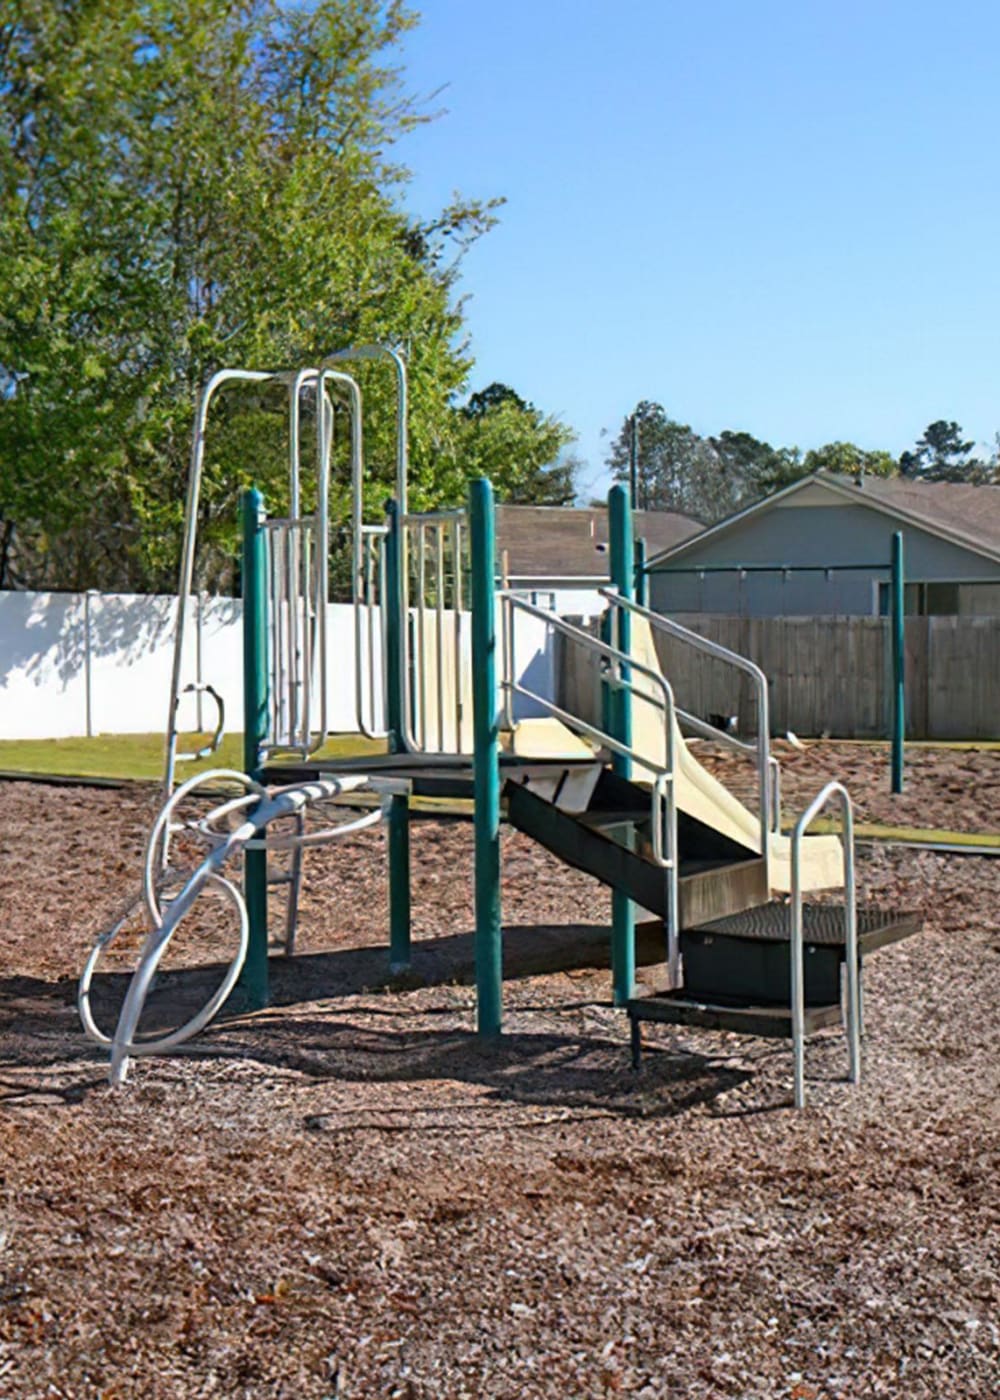 Playground outside at West Towne Cottages in Valdosta, Georgia